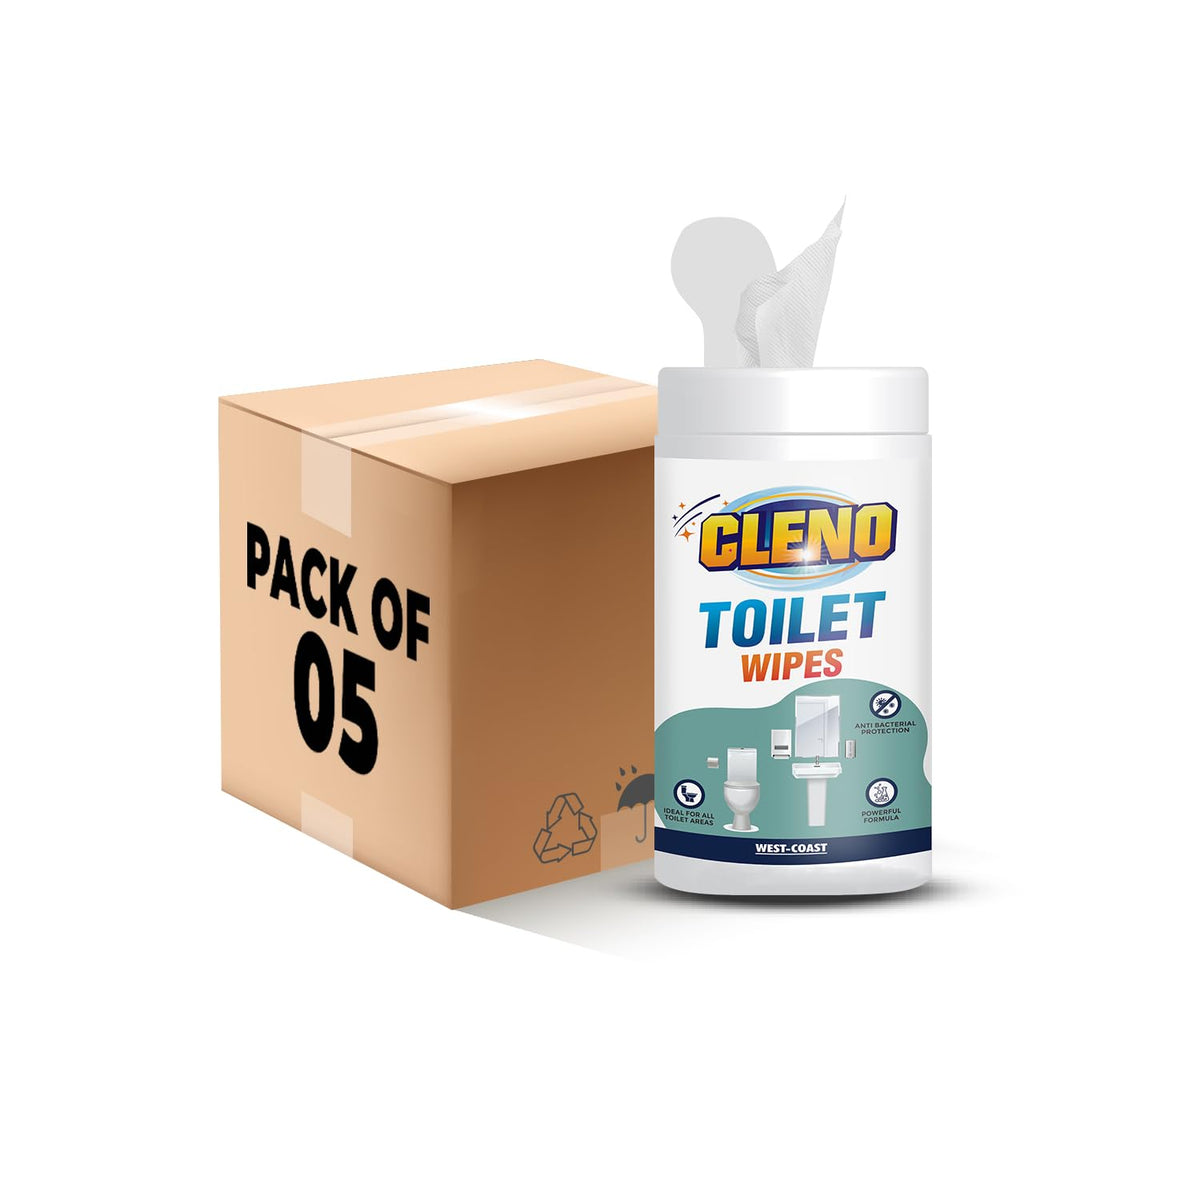 Cleno Toilet Cleaning Wet Wipes For all Toilet Areas like Toilet Commode/Toilet Seats/Flush/Knobs/Wash-basin - 50 Wipes (Pack of 5) (Ready to Use)